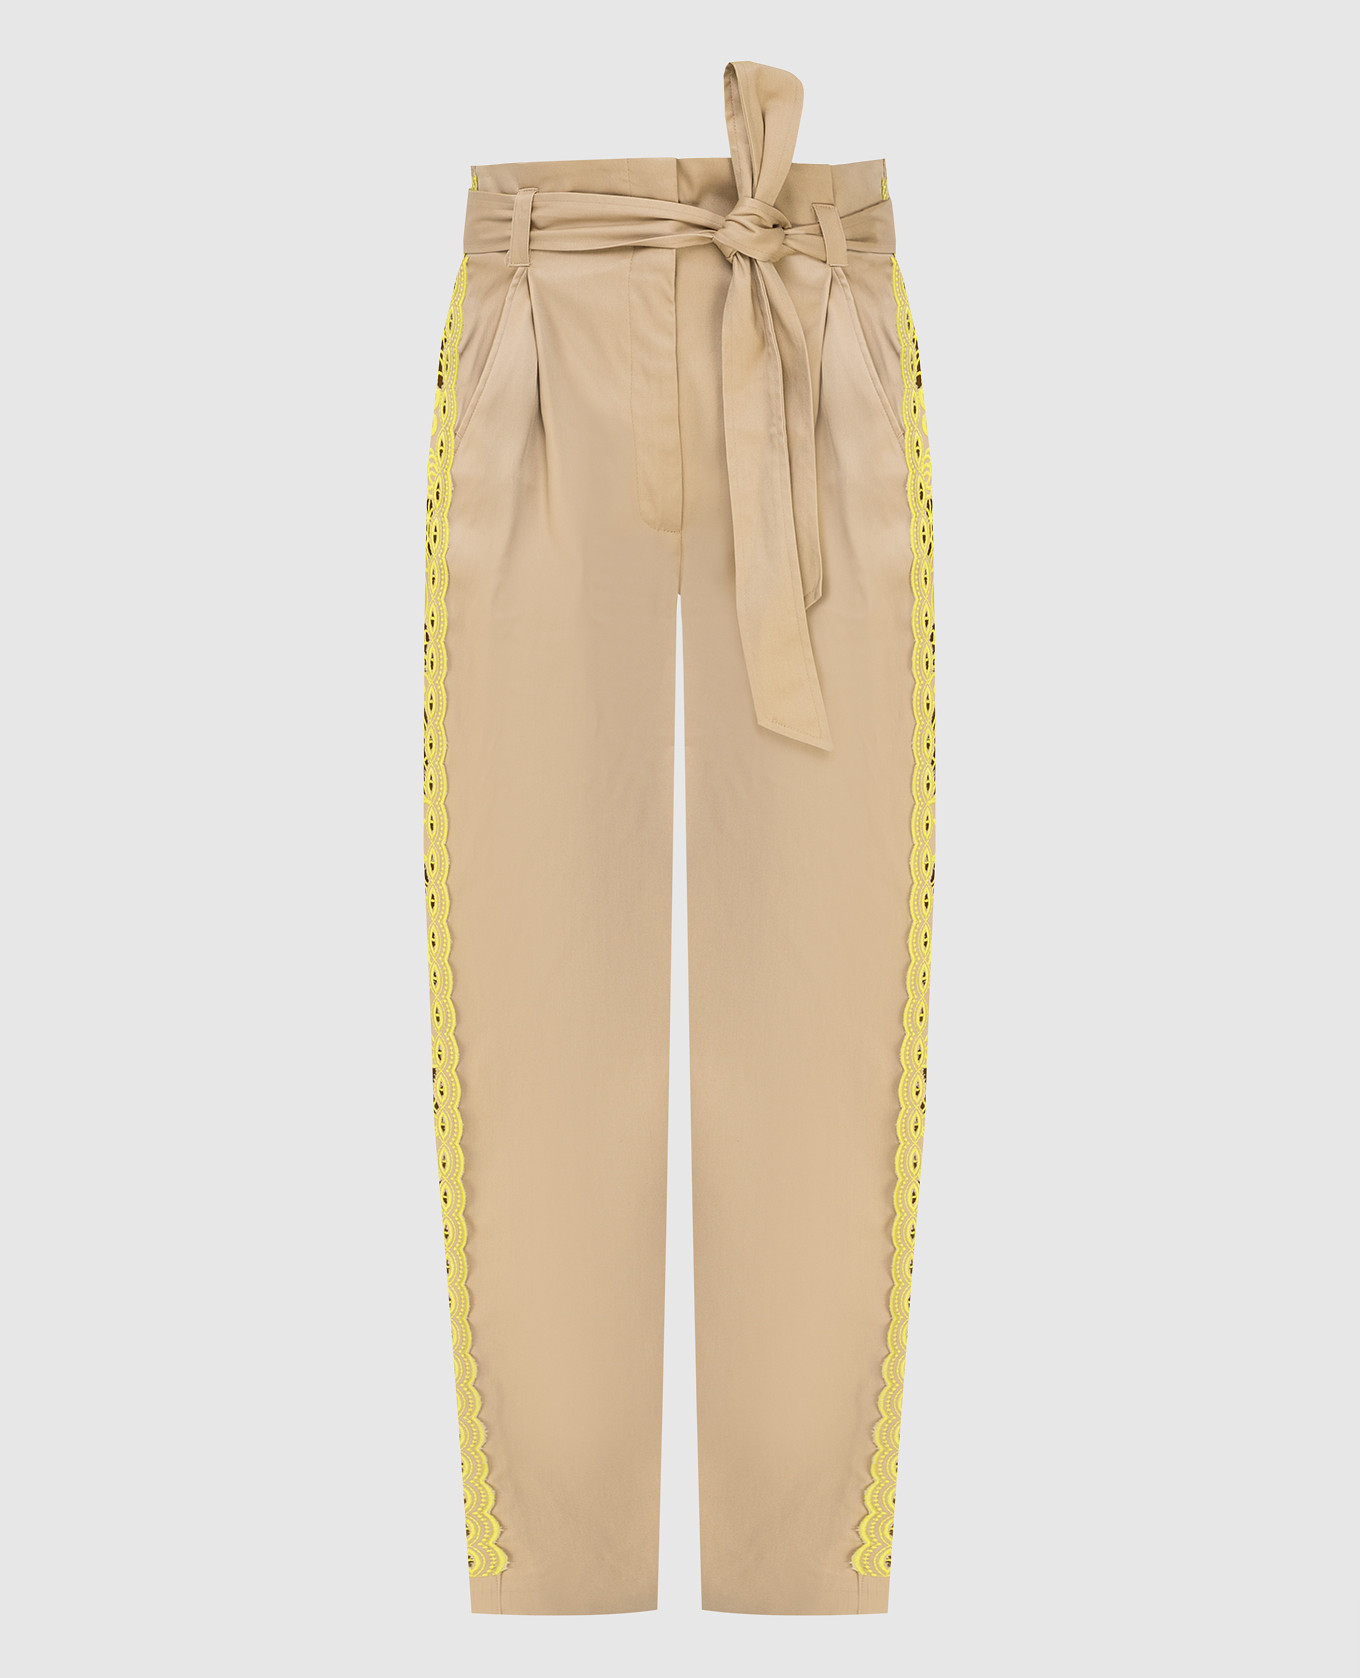 Beige trousers with stripes